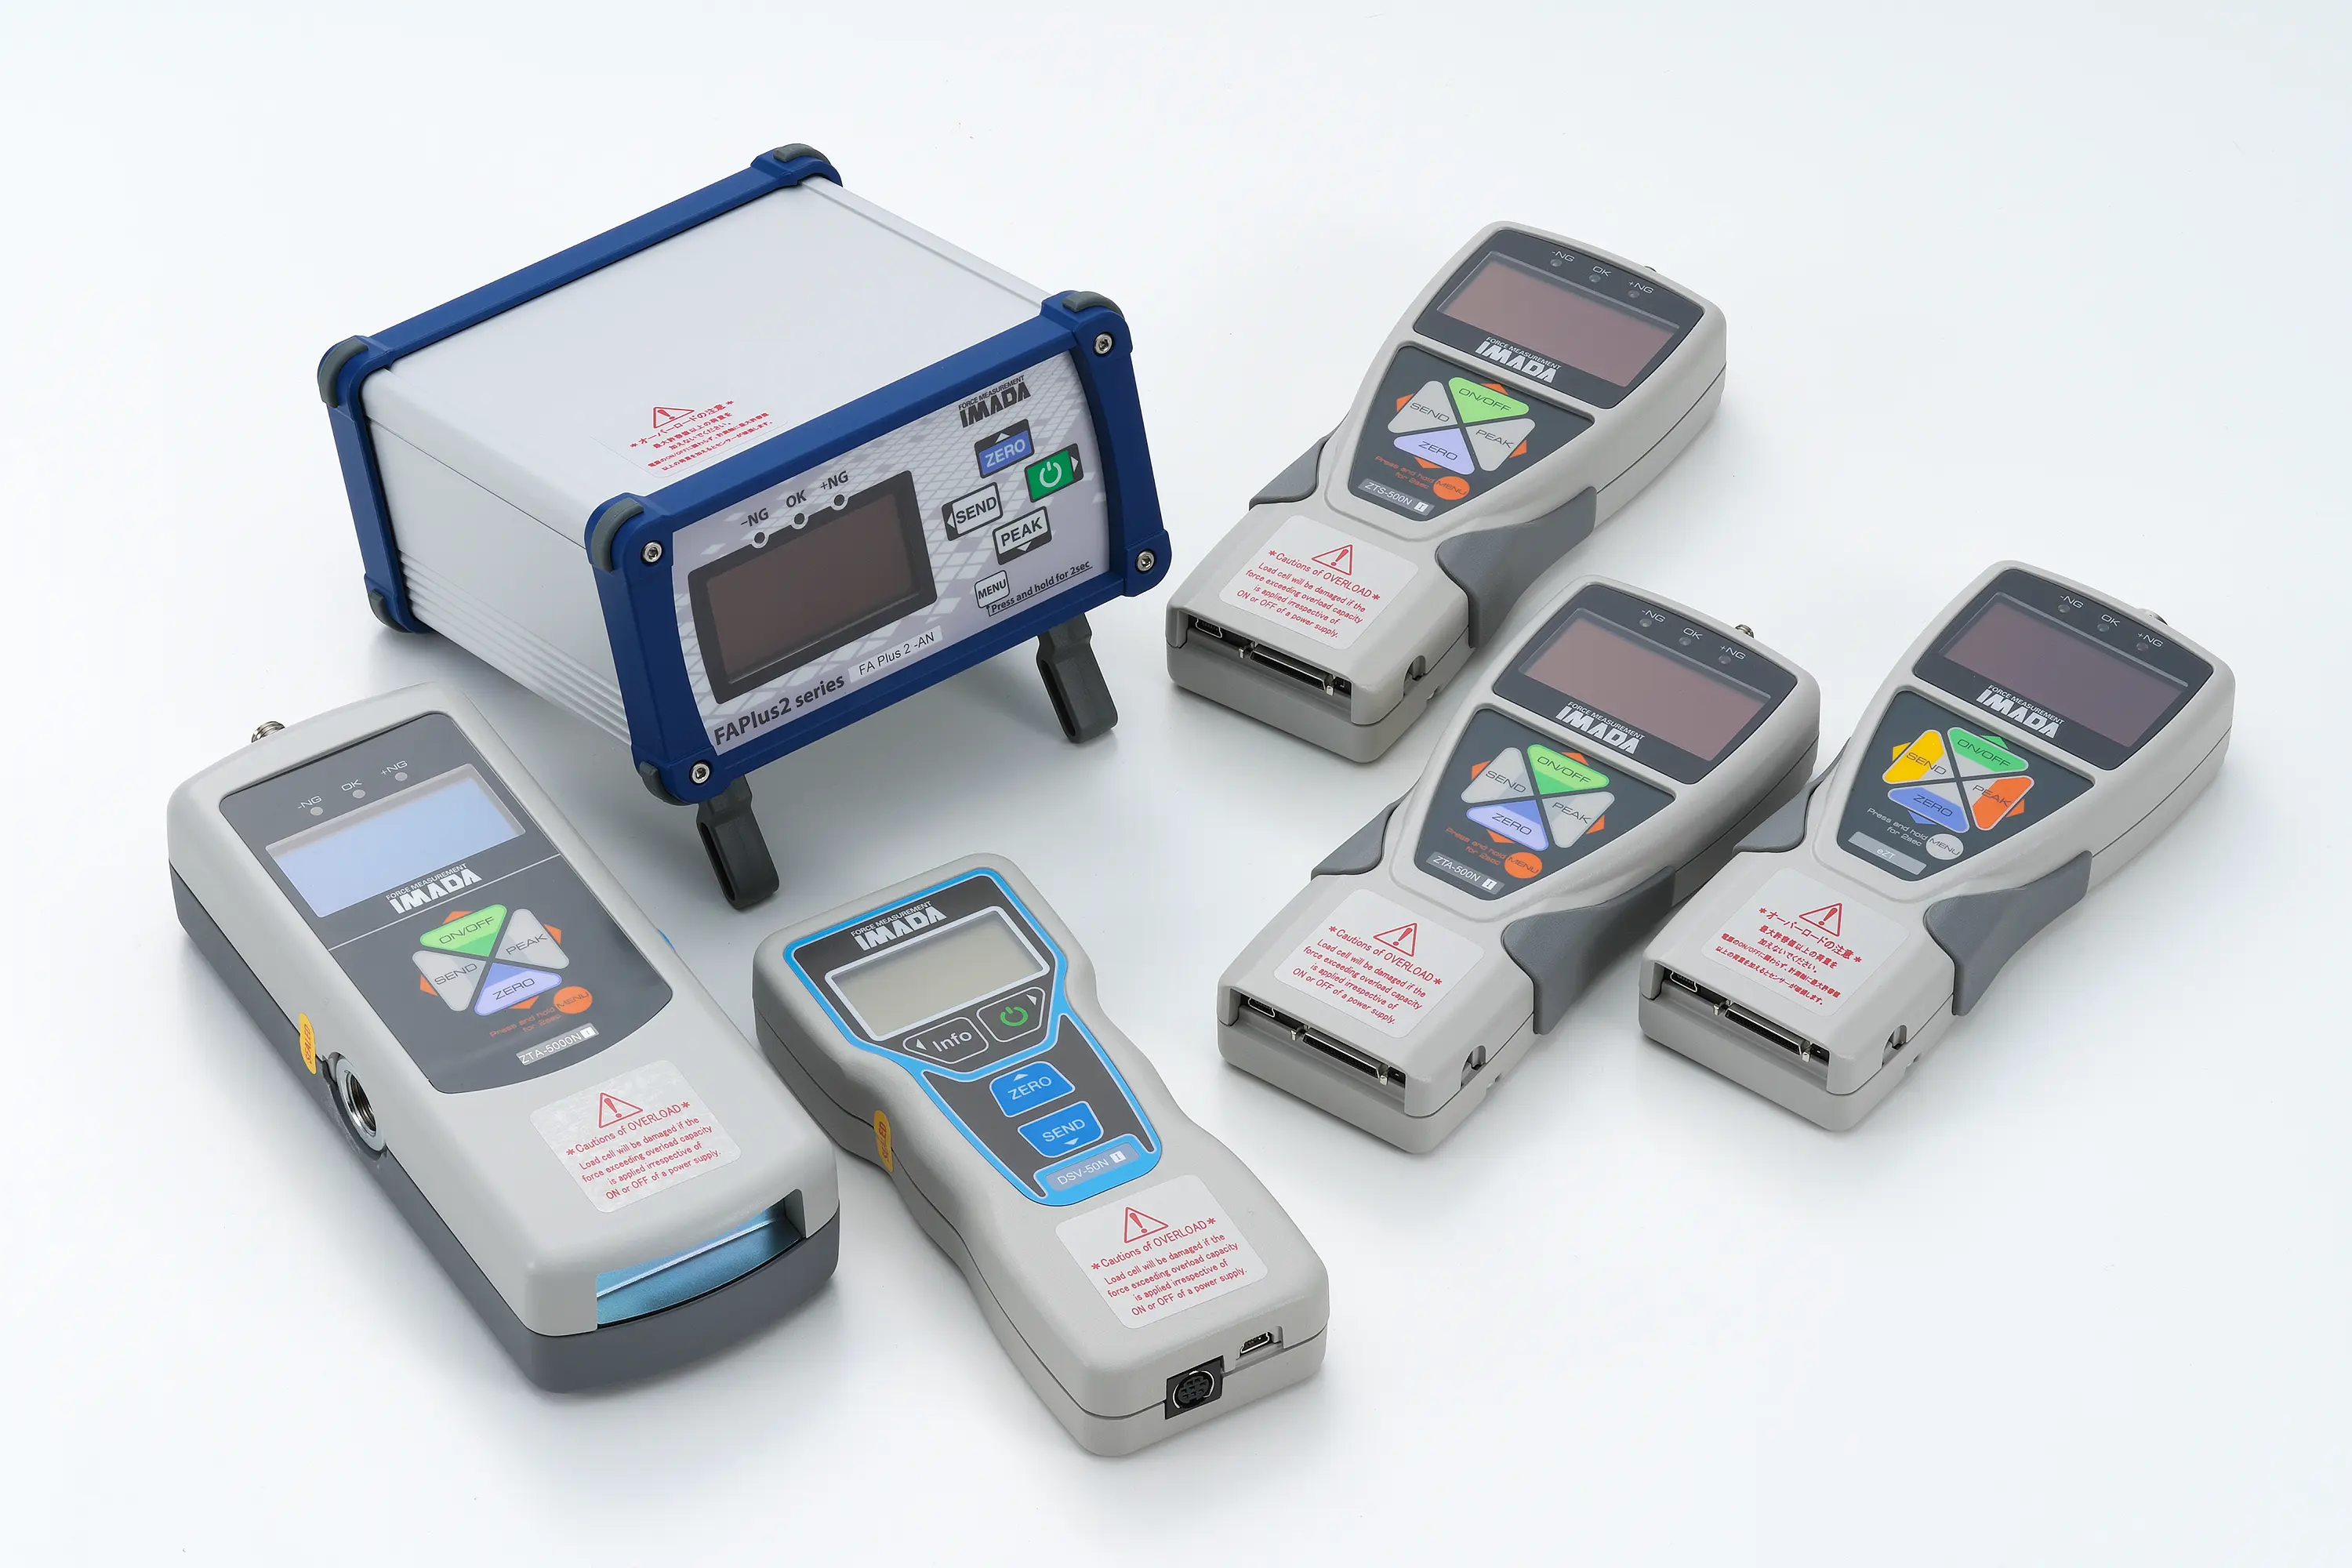 DSV series | IMADA specializes in force measurement